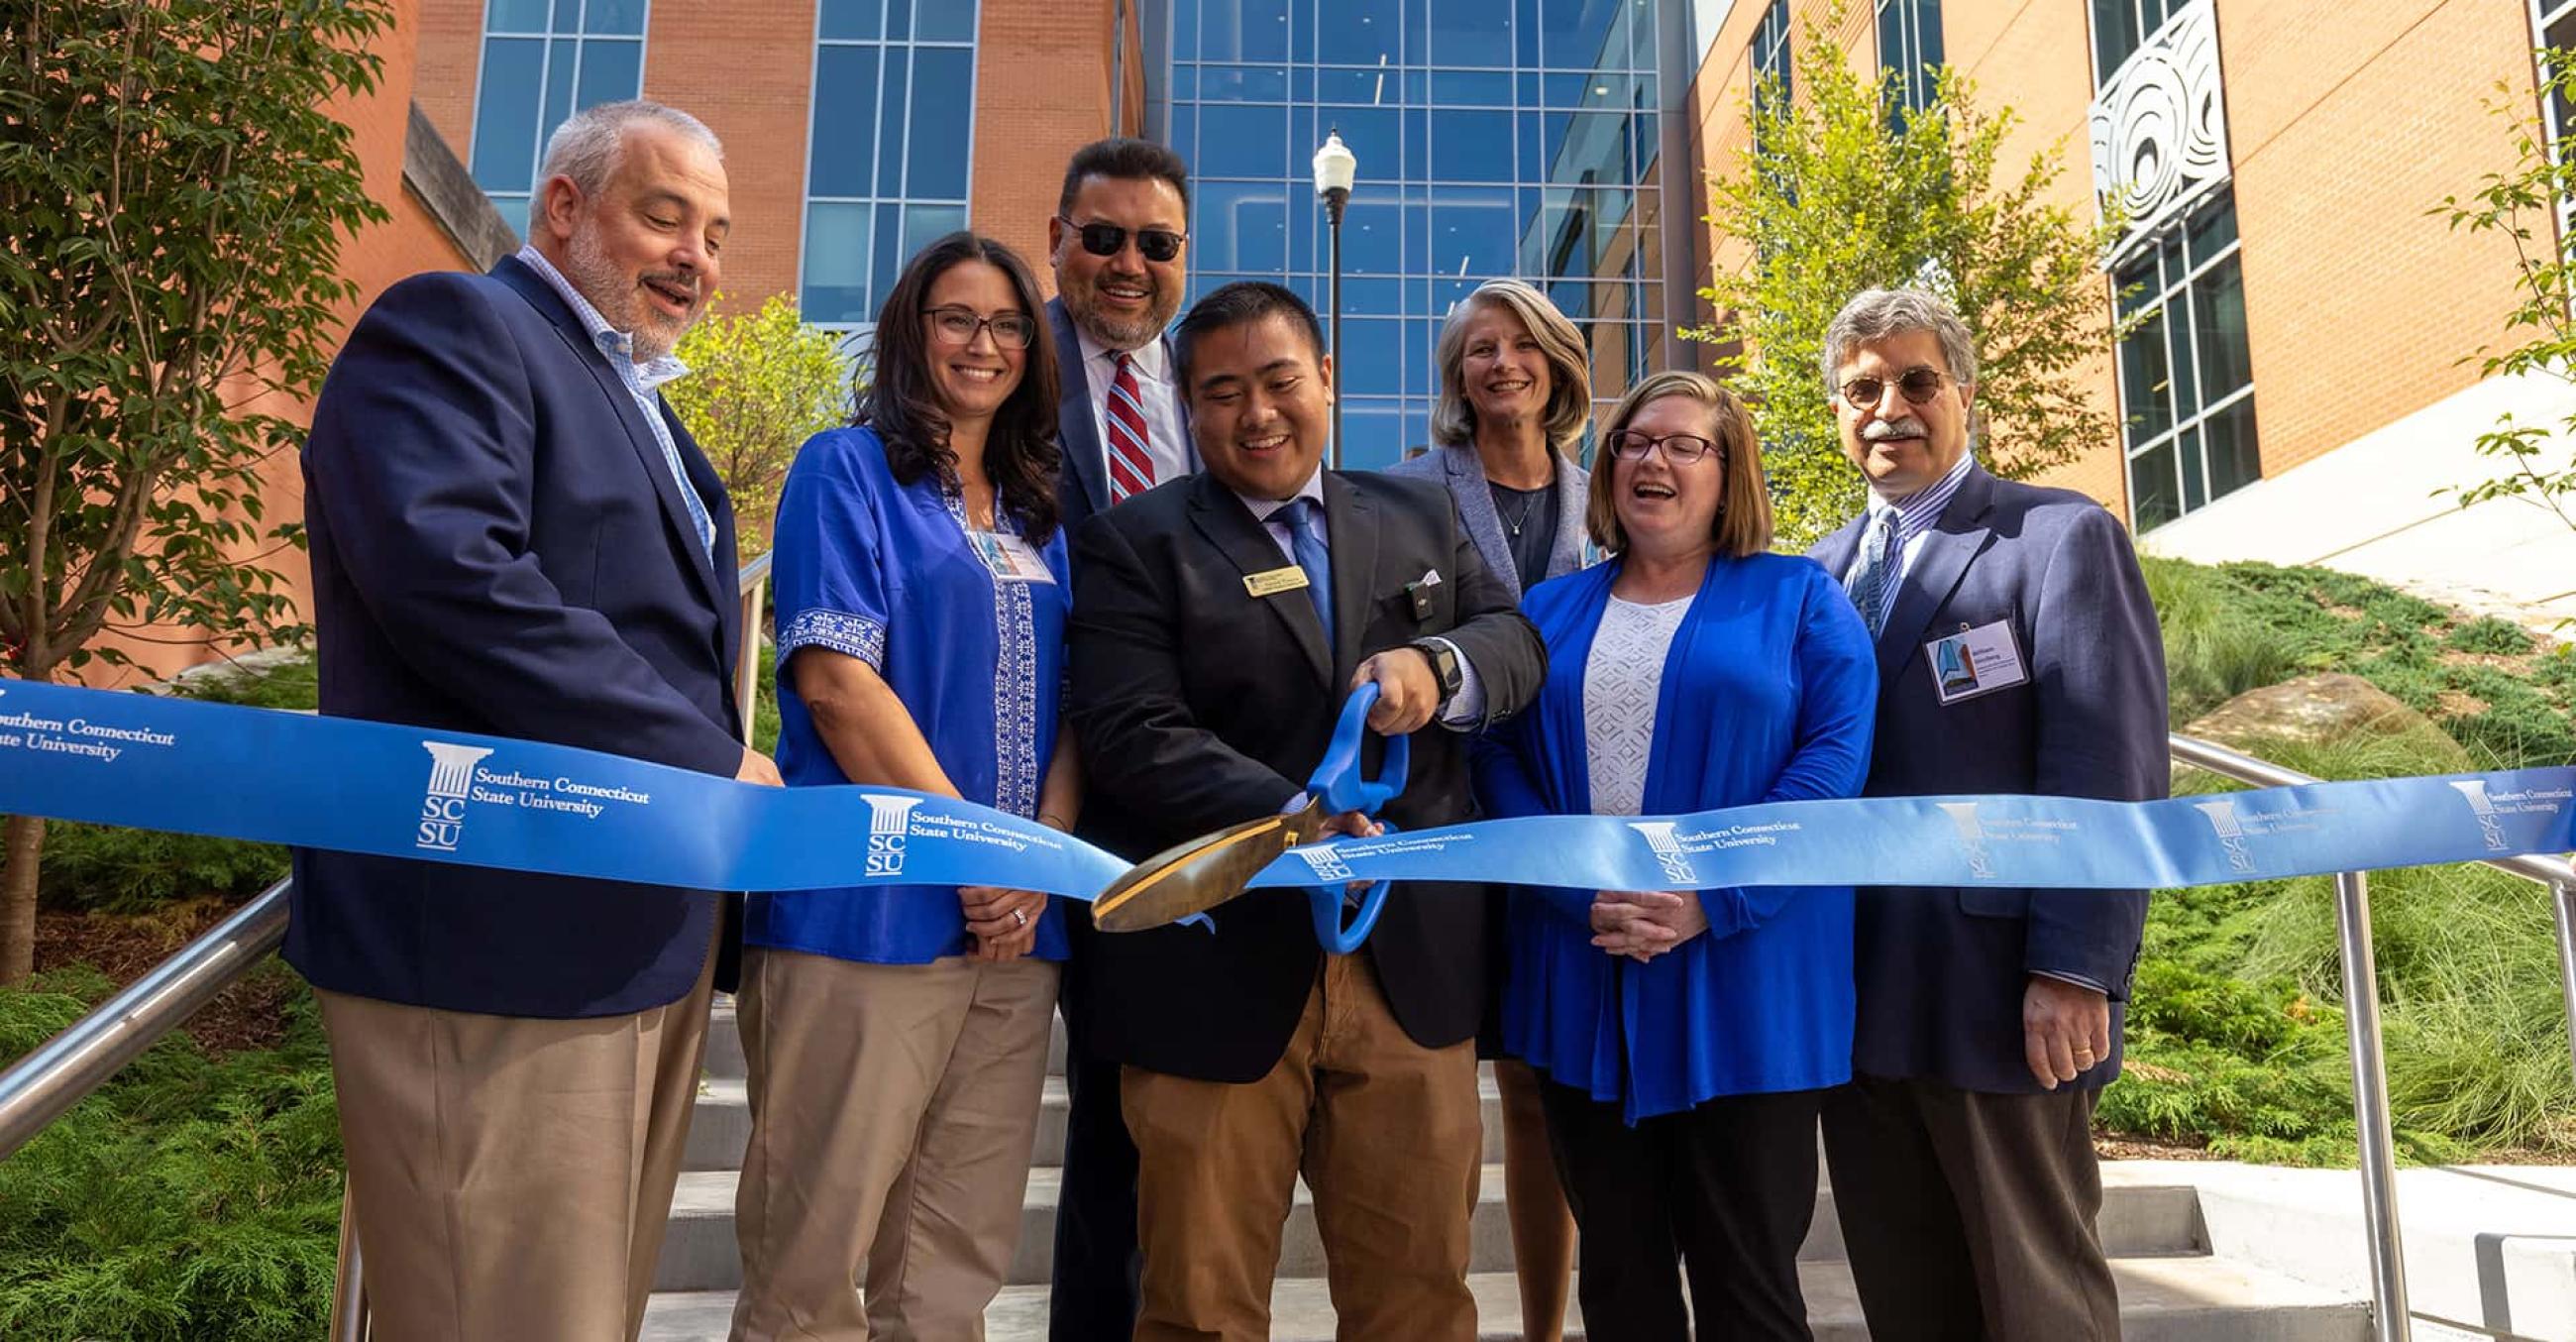 Cutting the ribbon to officially open the new building: President Joe Bertolino; Melody Lehrman, communication disorders clinic advocate; CSCU President Terrence Cheng; nursing student Dan Ybanez, '25; Dean Sandra Bulmer; Michelle Gilman, commissioner, State Department of Administrative Services; and Will Ginsberg, president and CEO, Community Foundation of Greater New Haven. 